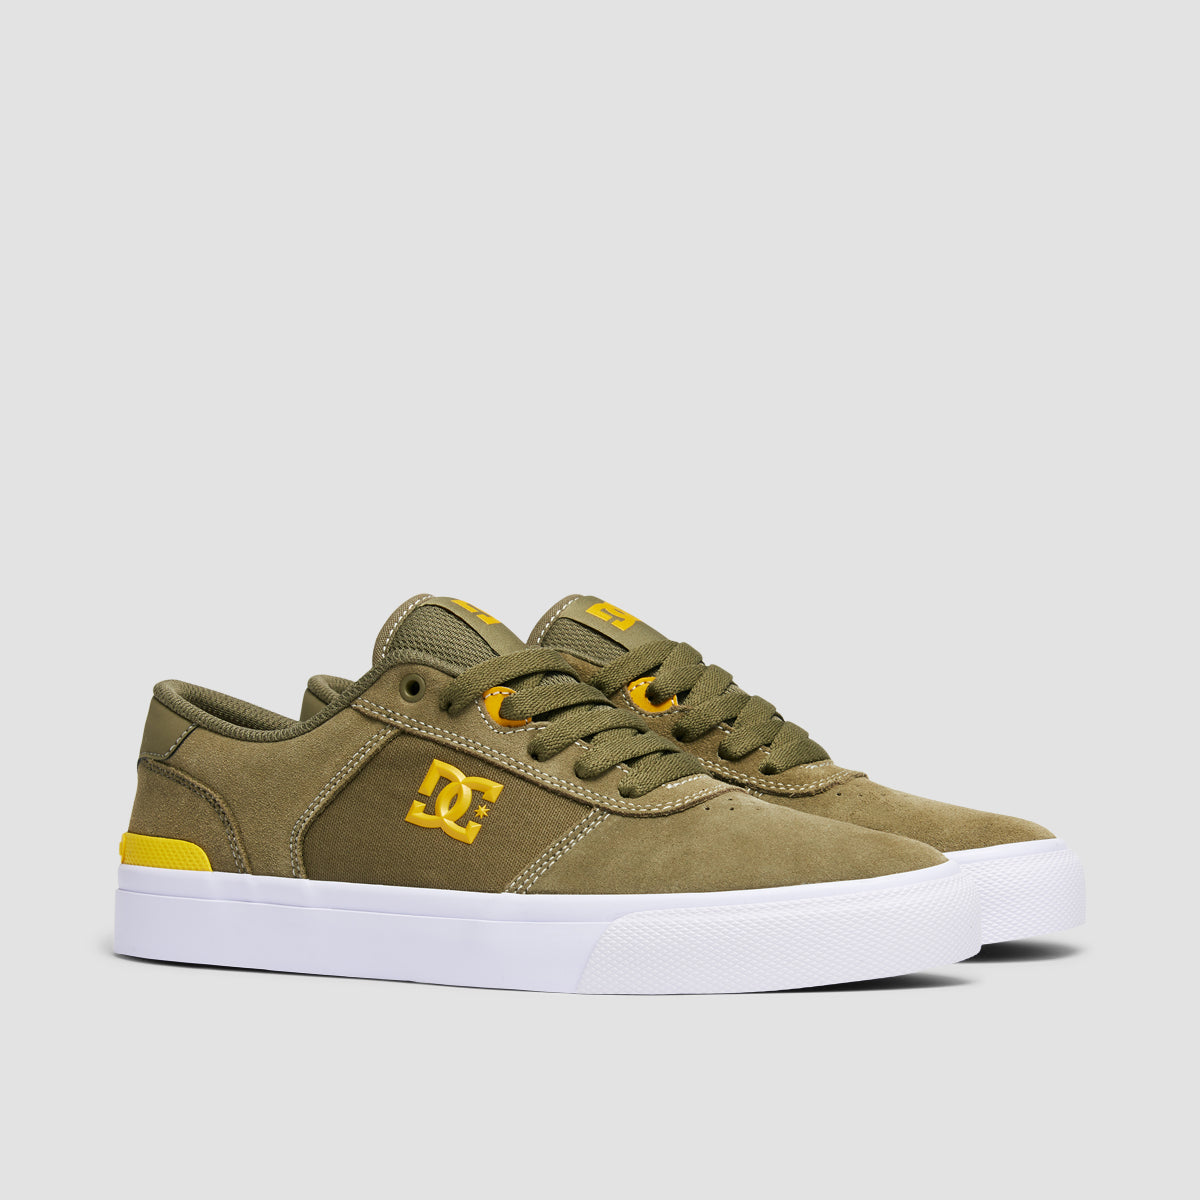 DC Teknic S Shoes - Army/Olive